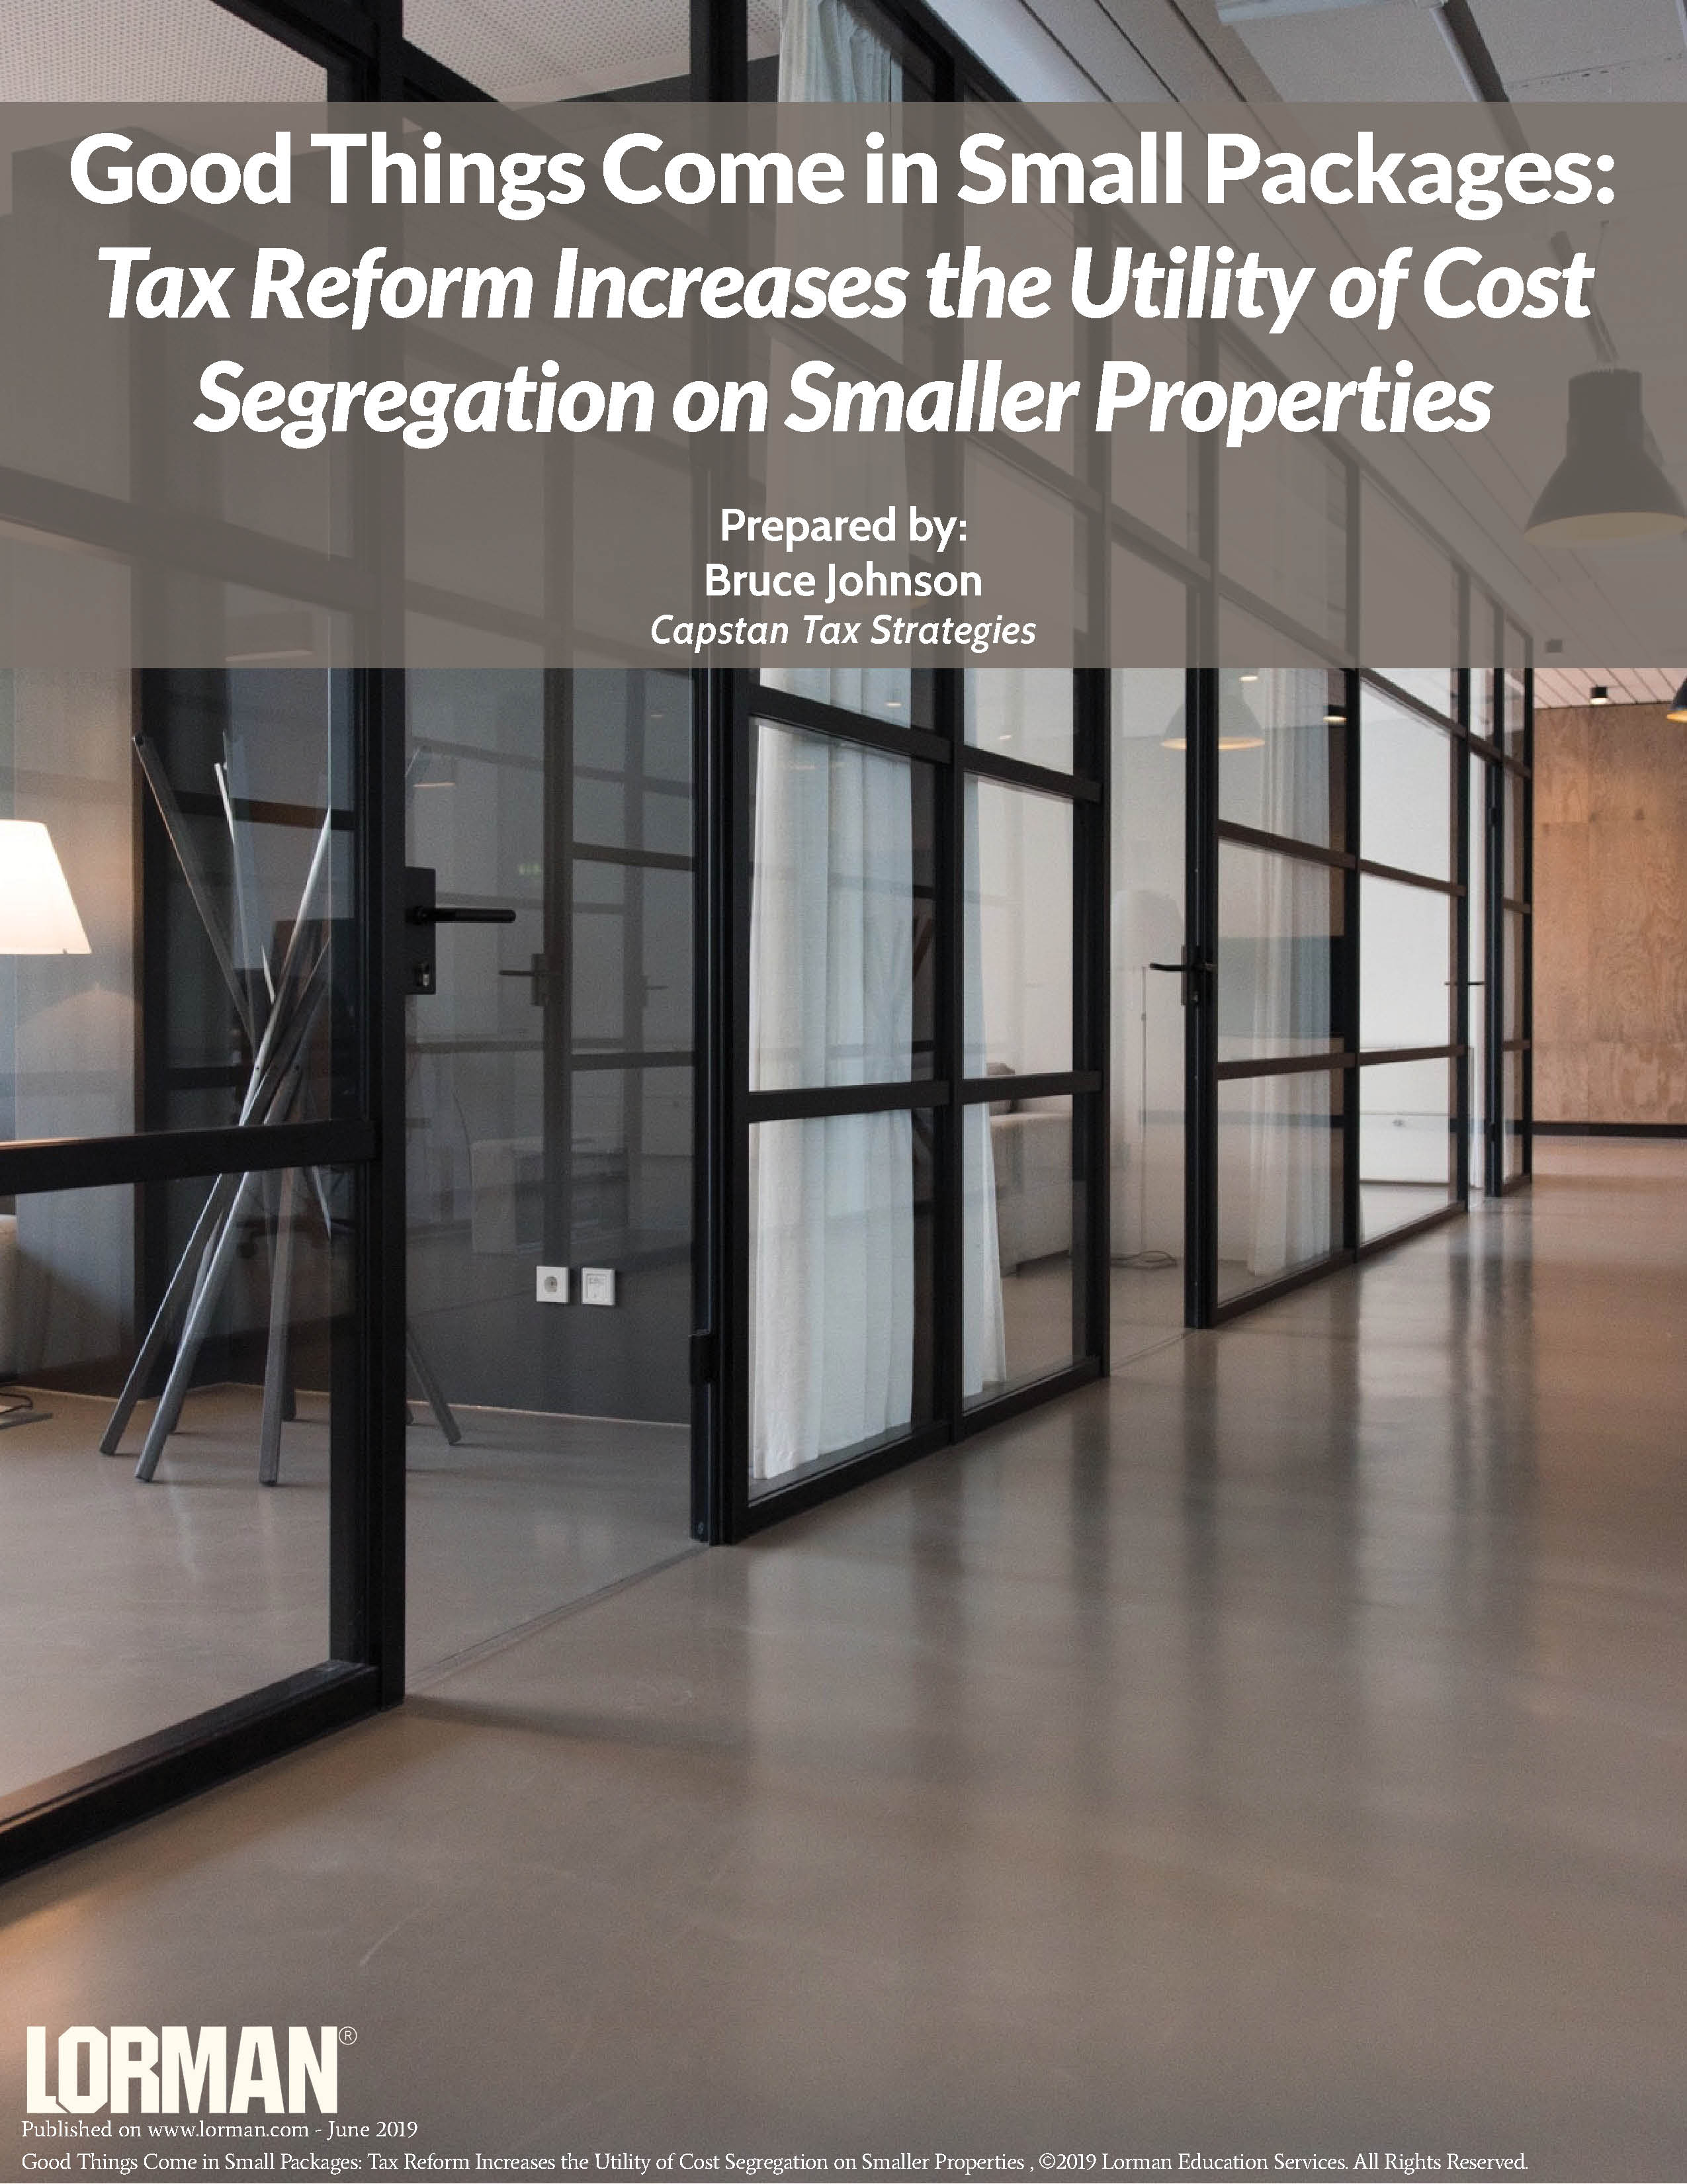 Tax Reform Increases the Utility of Cost Segregation on Smaller Properties  